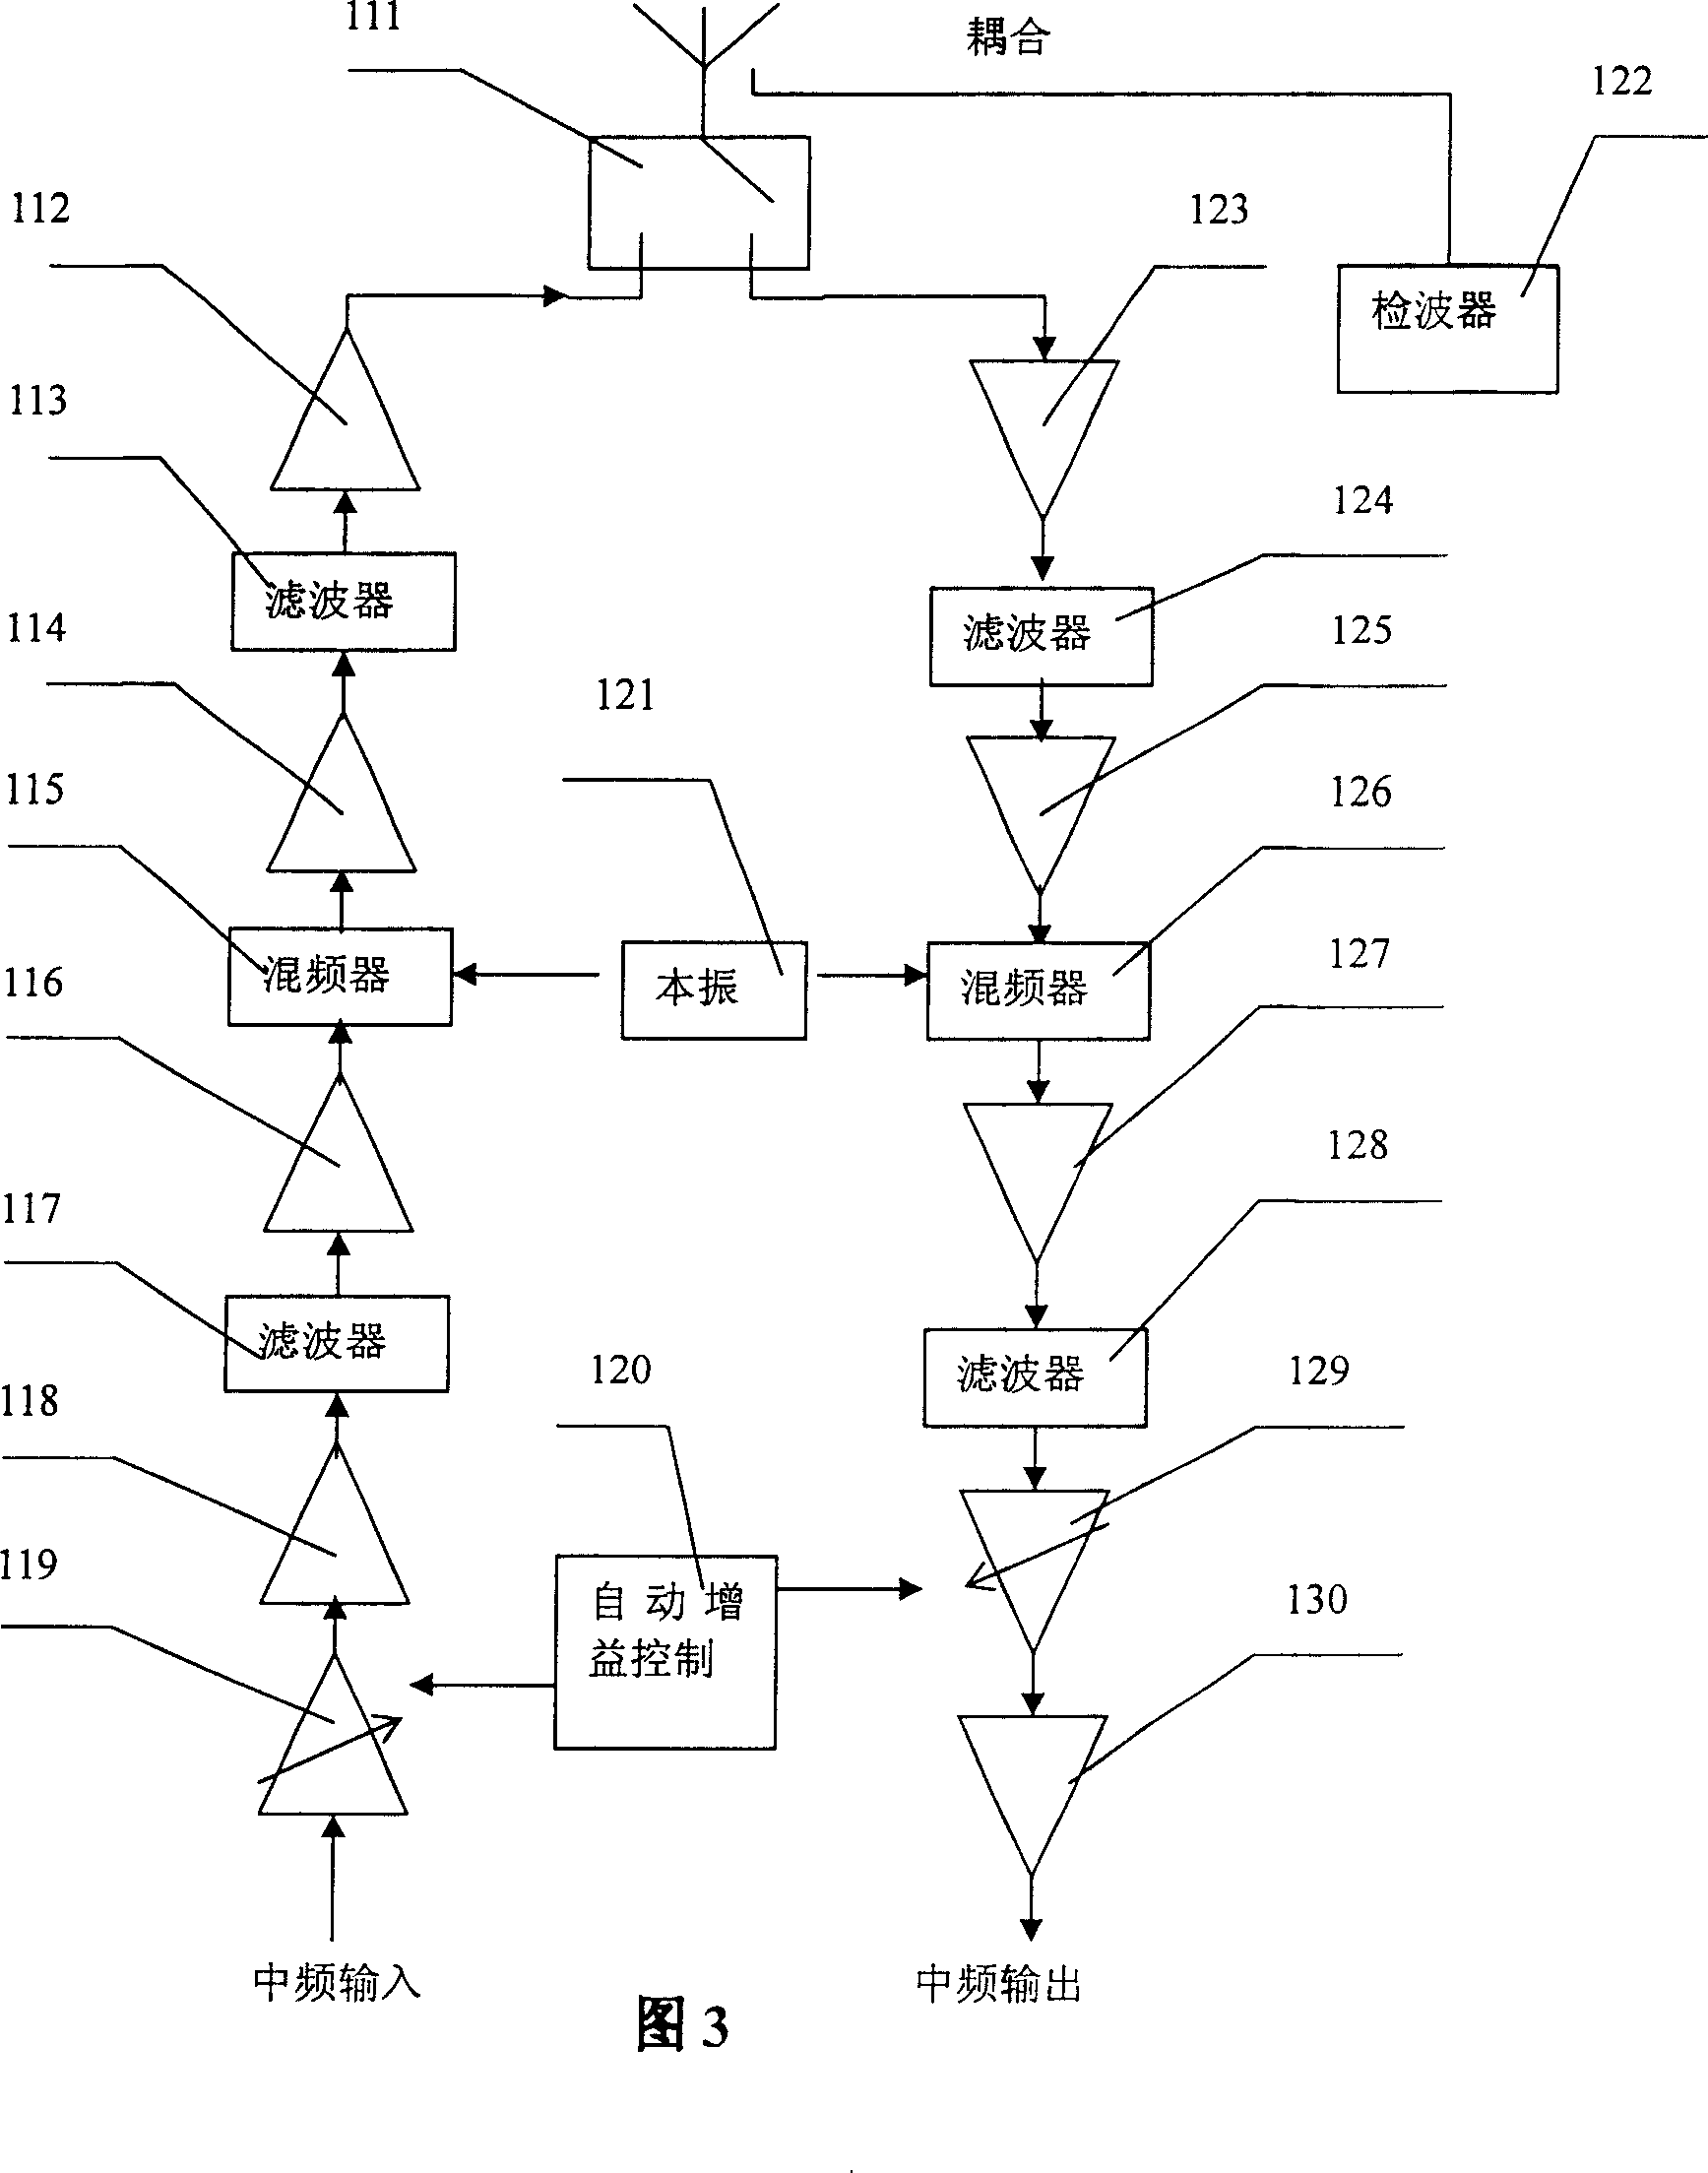 Direct transmitting station for synchronous CDMA system and its control method